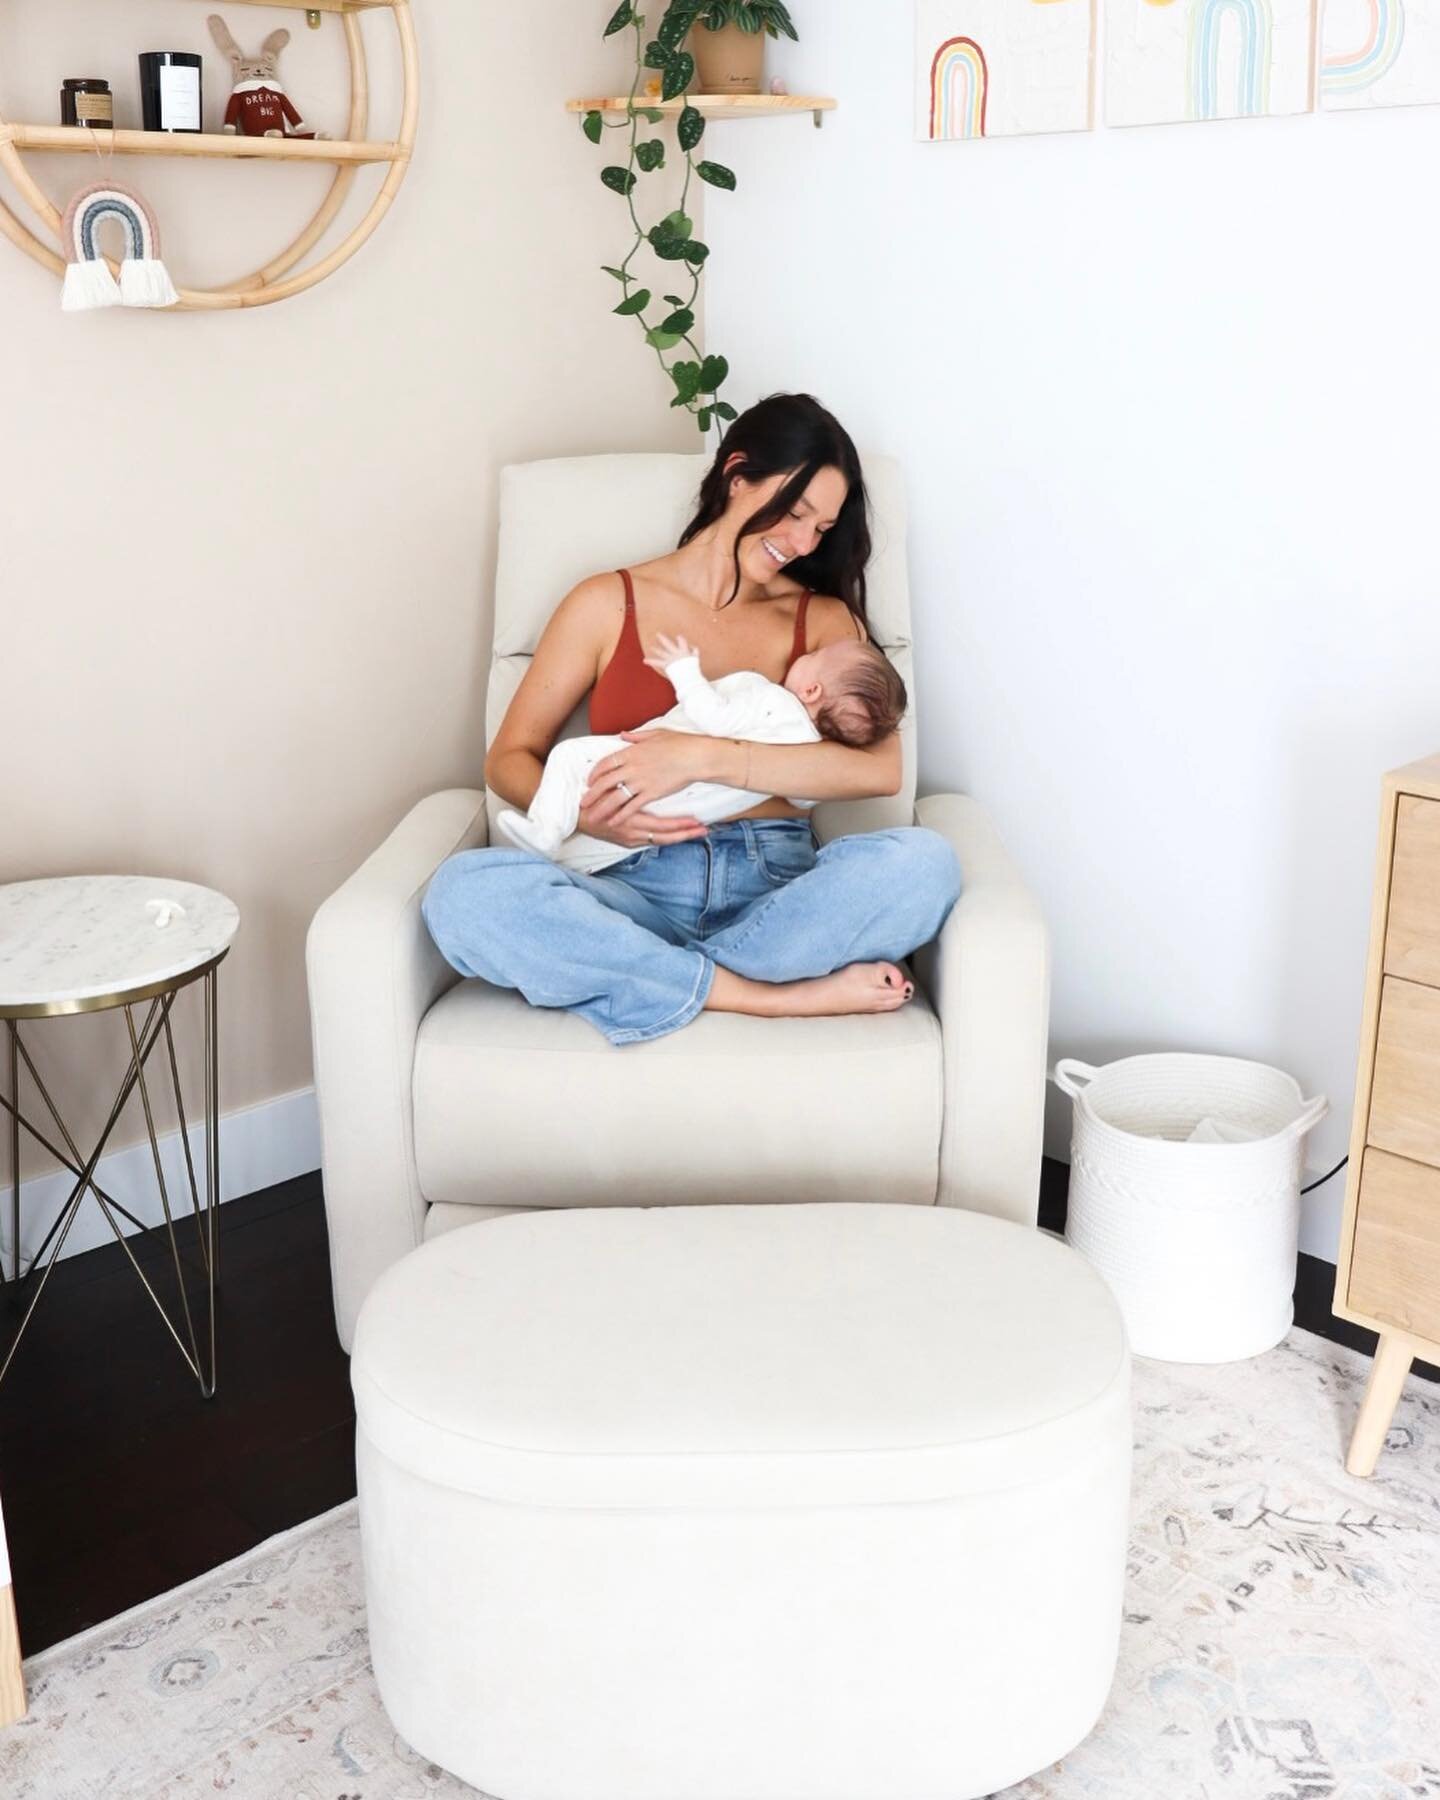 The zen corner🌱

Our favorite spot in the nursery. The Glider Plus + ottoman by @nurture_and 🤎is where we spend majority of our time feeding, napping, rocking, gliding, crying,
pooing and cuddling!

I could hold her like this forever!

#nursery #ze